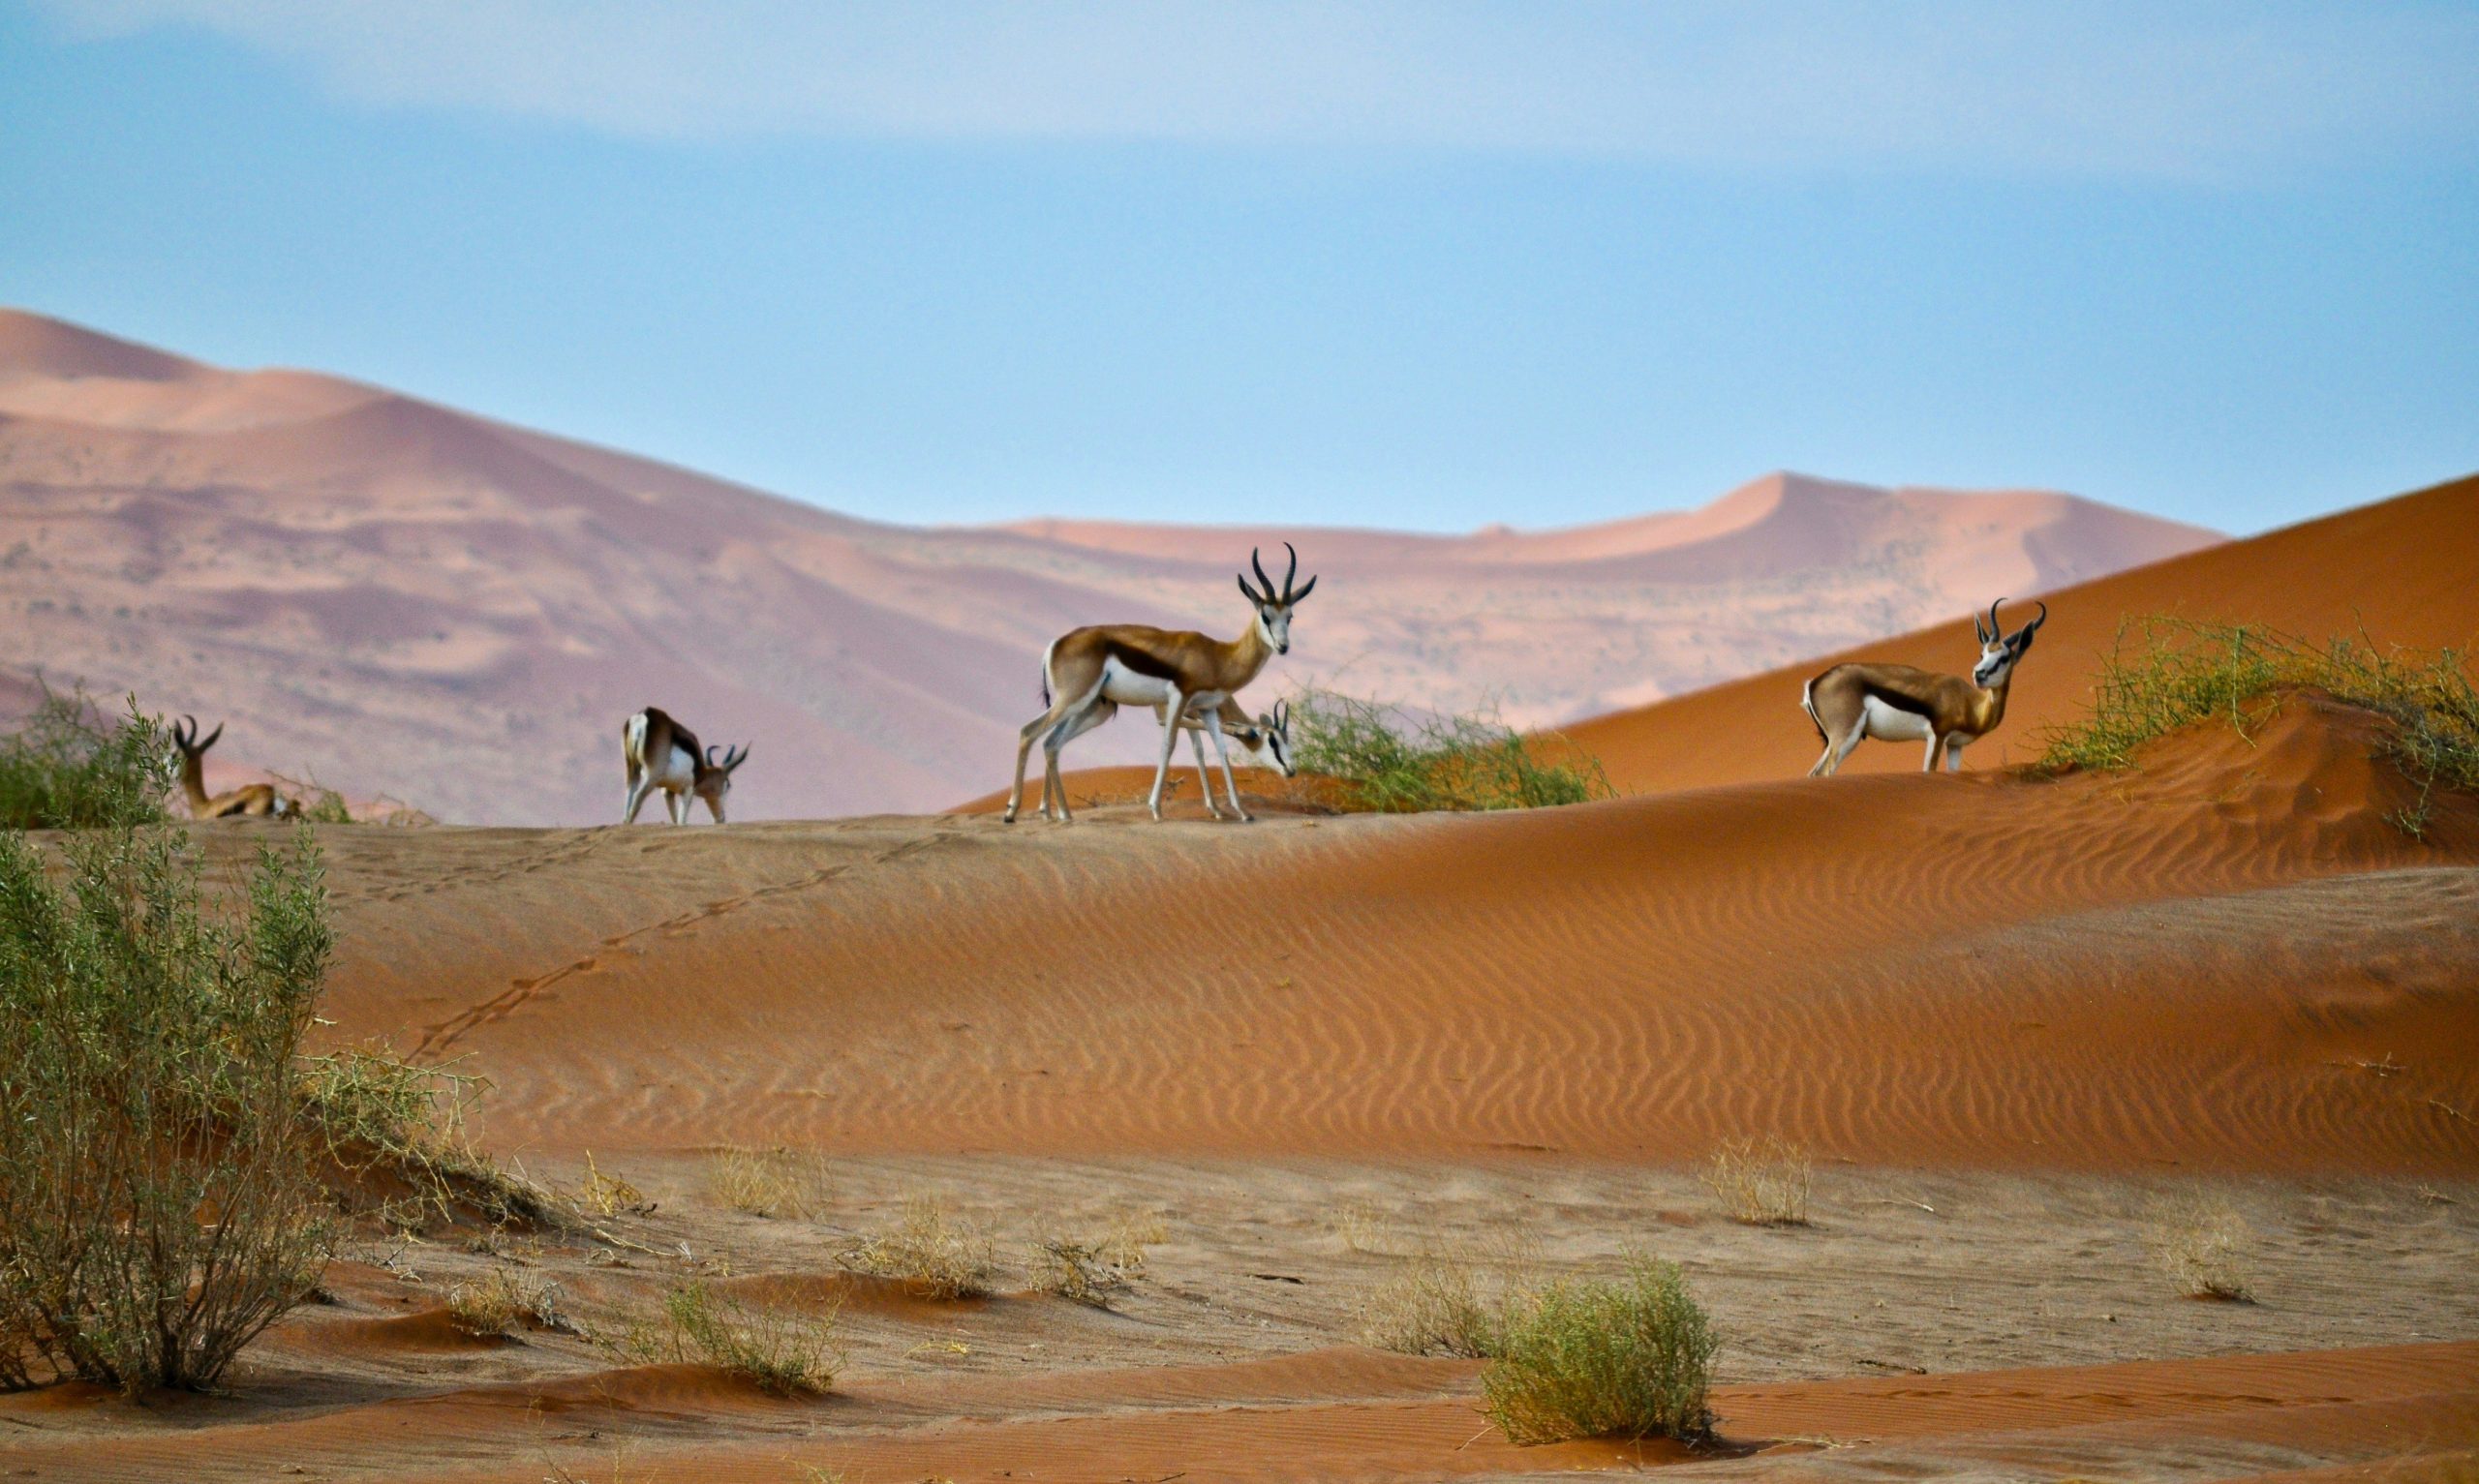 discover the stunning landscapes and diverse wildlife of namibia with our comprehensive travel guide. plan your adventure to the heart of southern africa today.